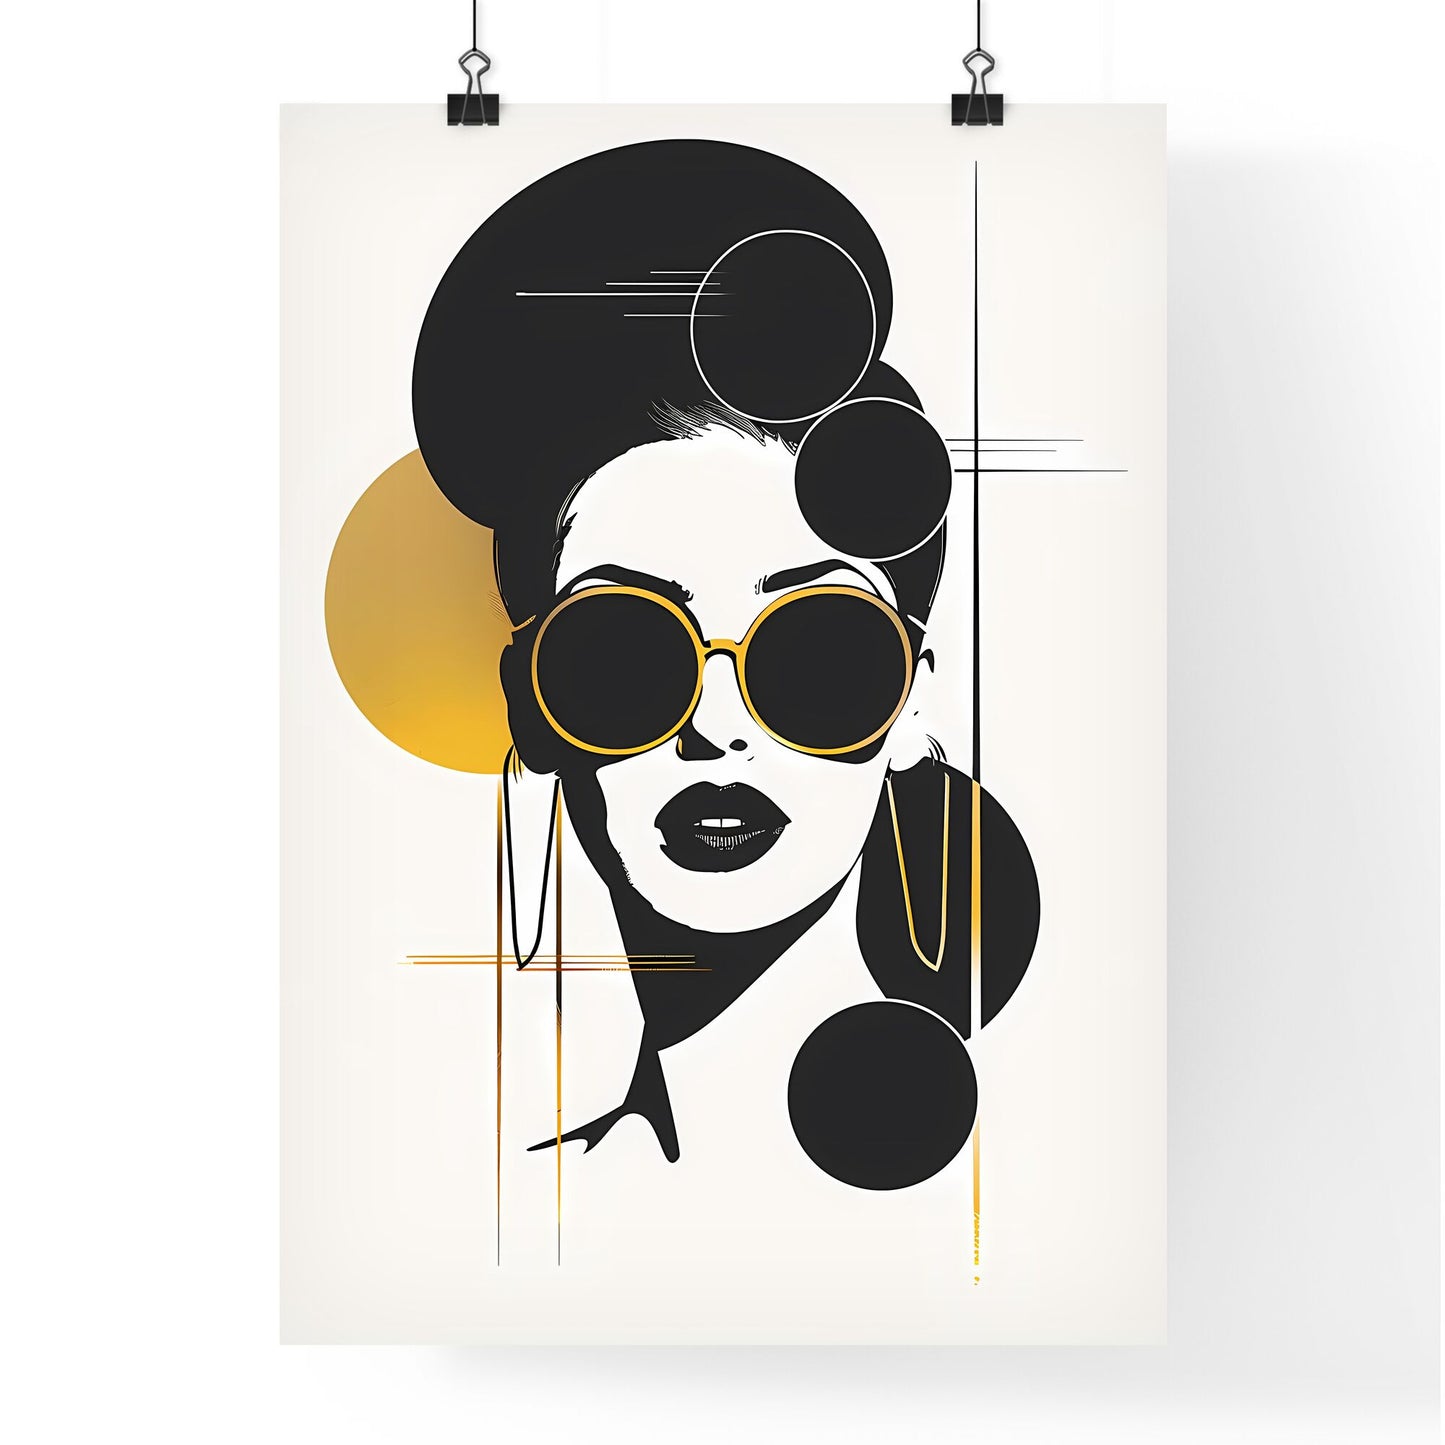 Minimalist Painting with Yellow Circle and Female with Single-Lens Sunglasses Emphasizing Art Default Title